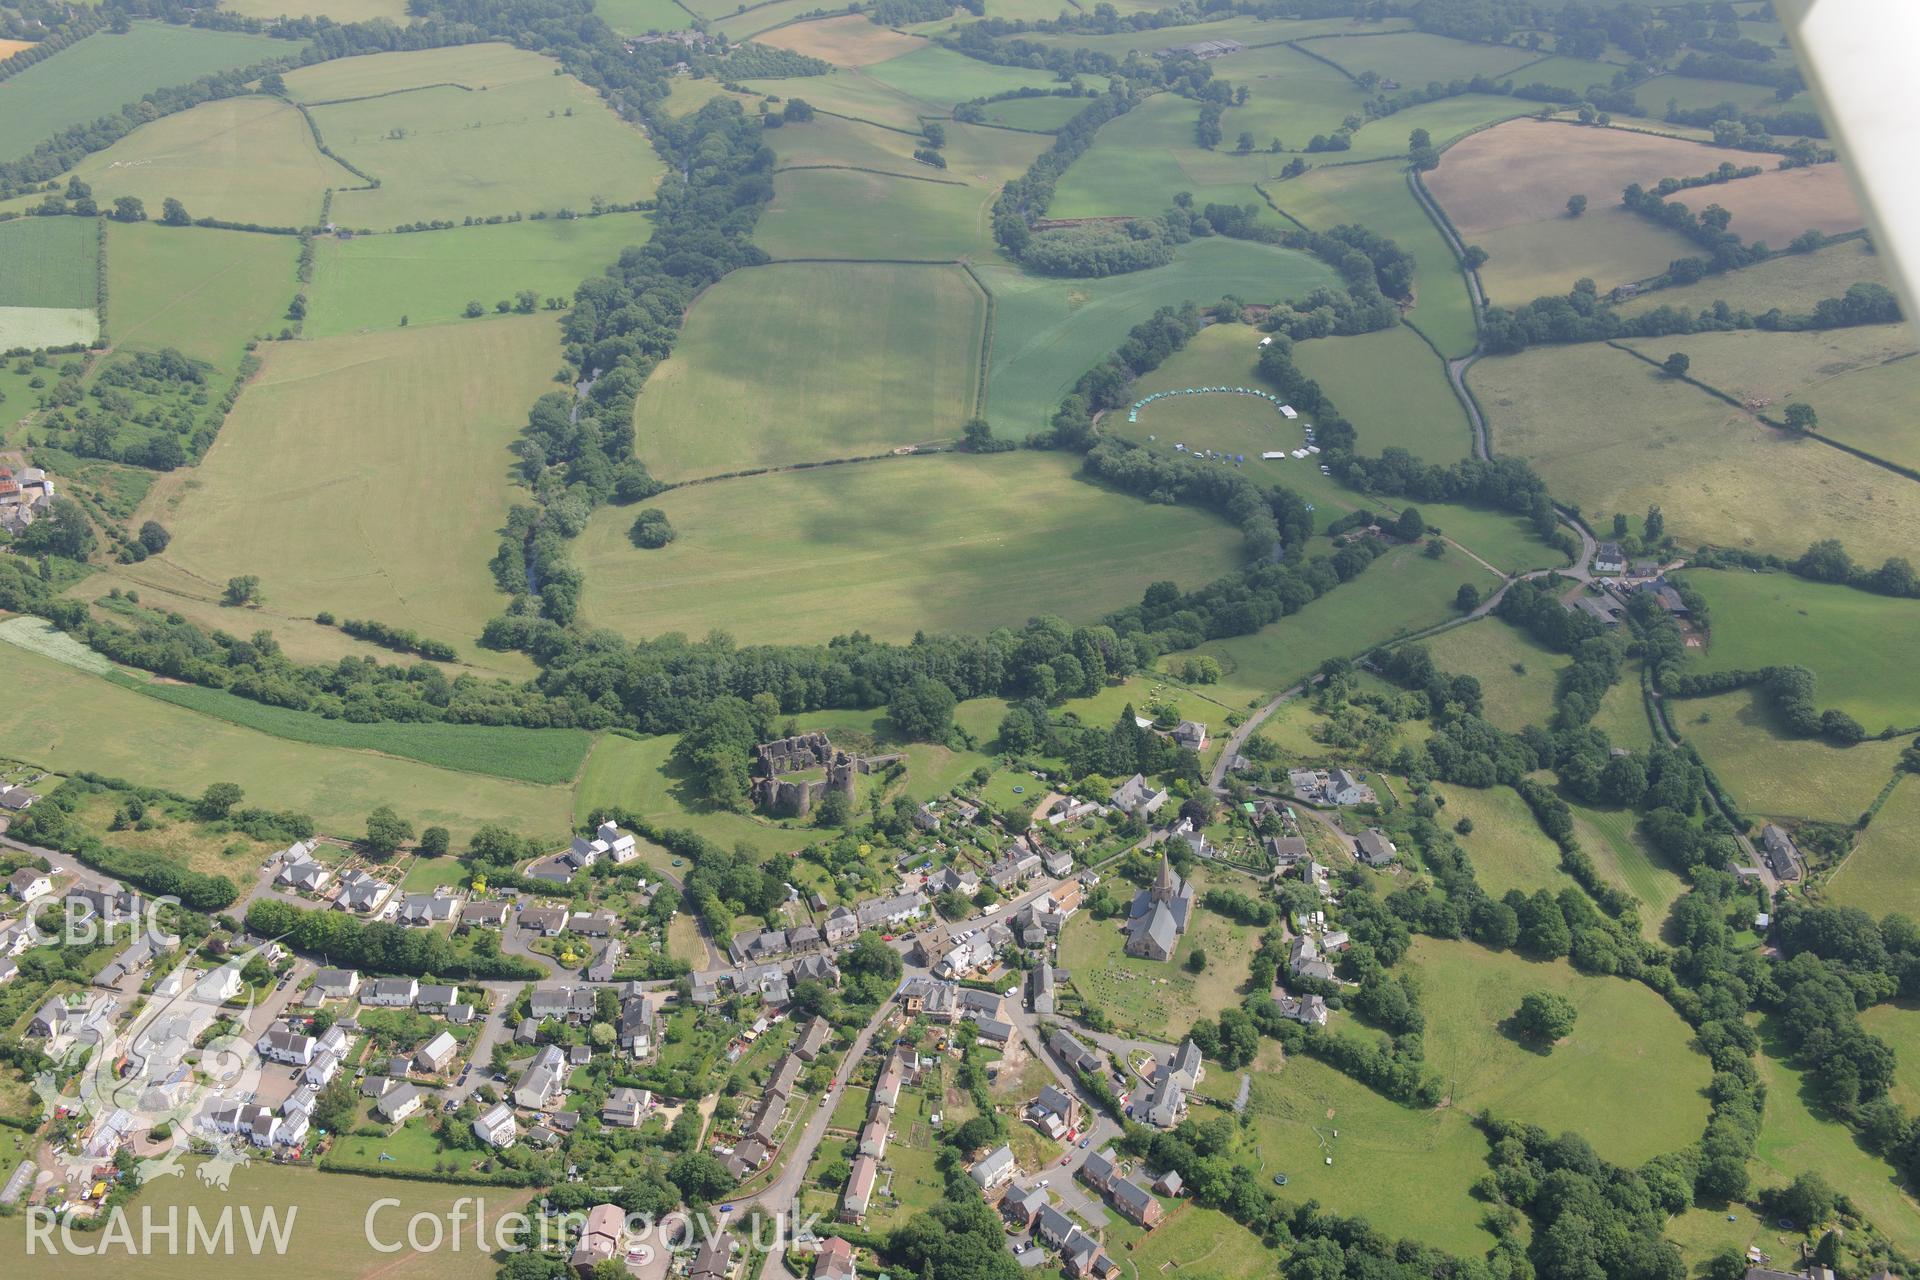 St. Nicholas' Church and Grosmont Castle, in the town of Grosmont, north east of Abergavenny. Oblique aerial photograph taken during the Royal Commission?s programme of archaeological aerial reconnaissance by Toby Driver on 1st August 2013.